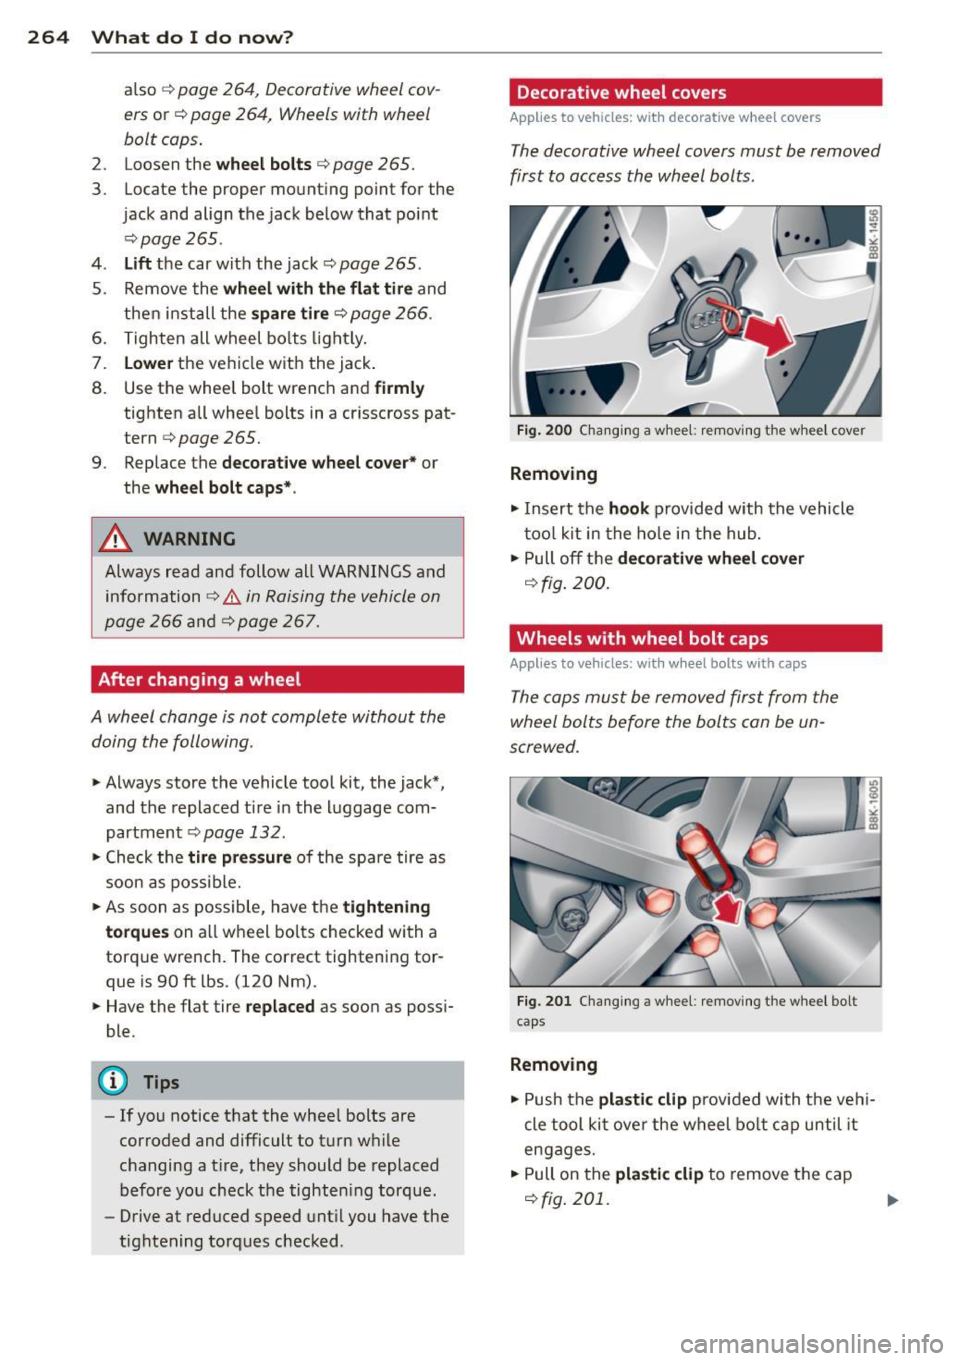 AUDI S4 2015  Owners Manual 264  What  do I do  now? 
also ¢ page  264, Decorative wheel  cov­
ers 
or ¢ page  264,  Wheels  with  wheel 
bolt  caps. 
2 .  Loosen  the wheel  bolts ¢ page  265. 
3.  Locate  the  proper  moun